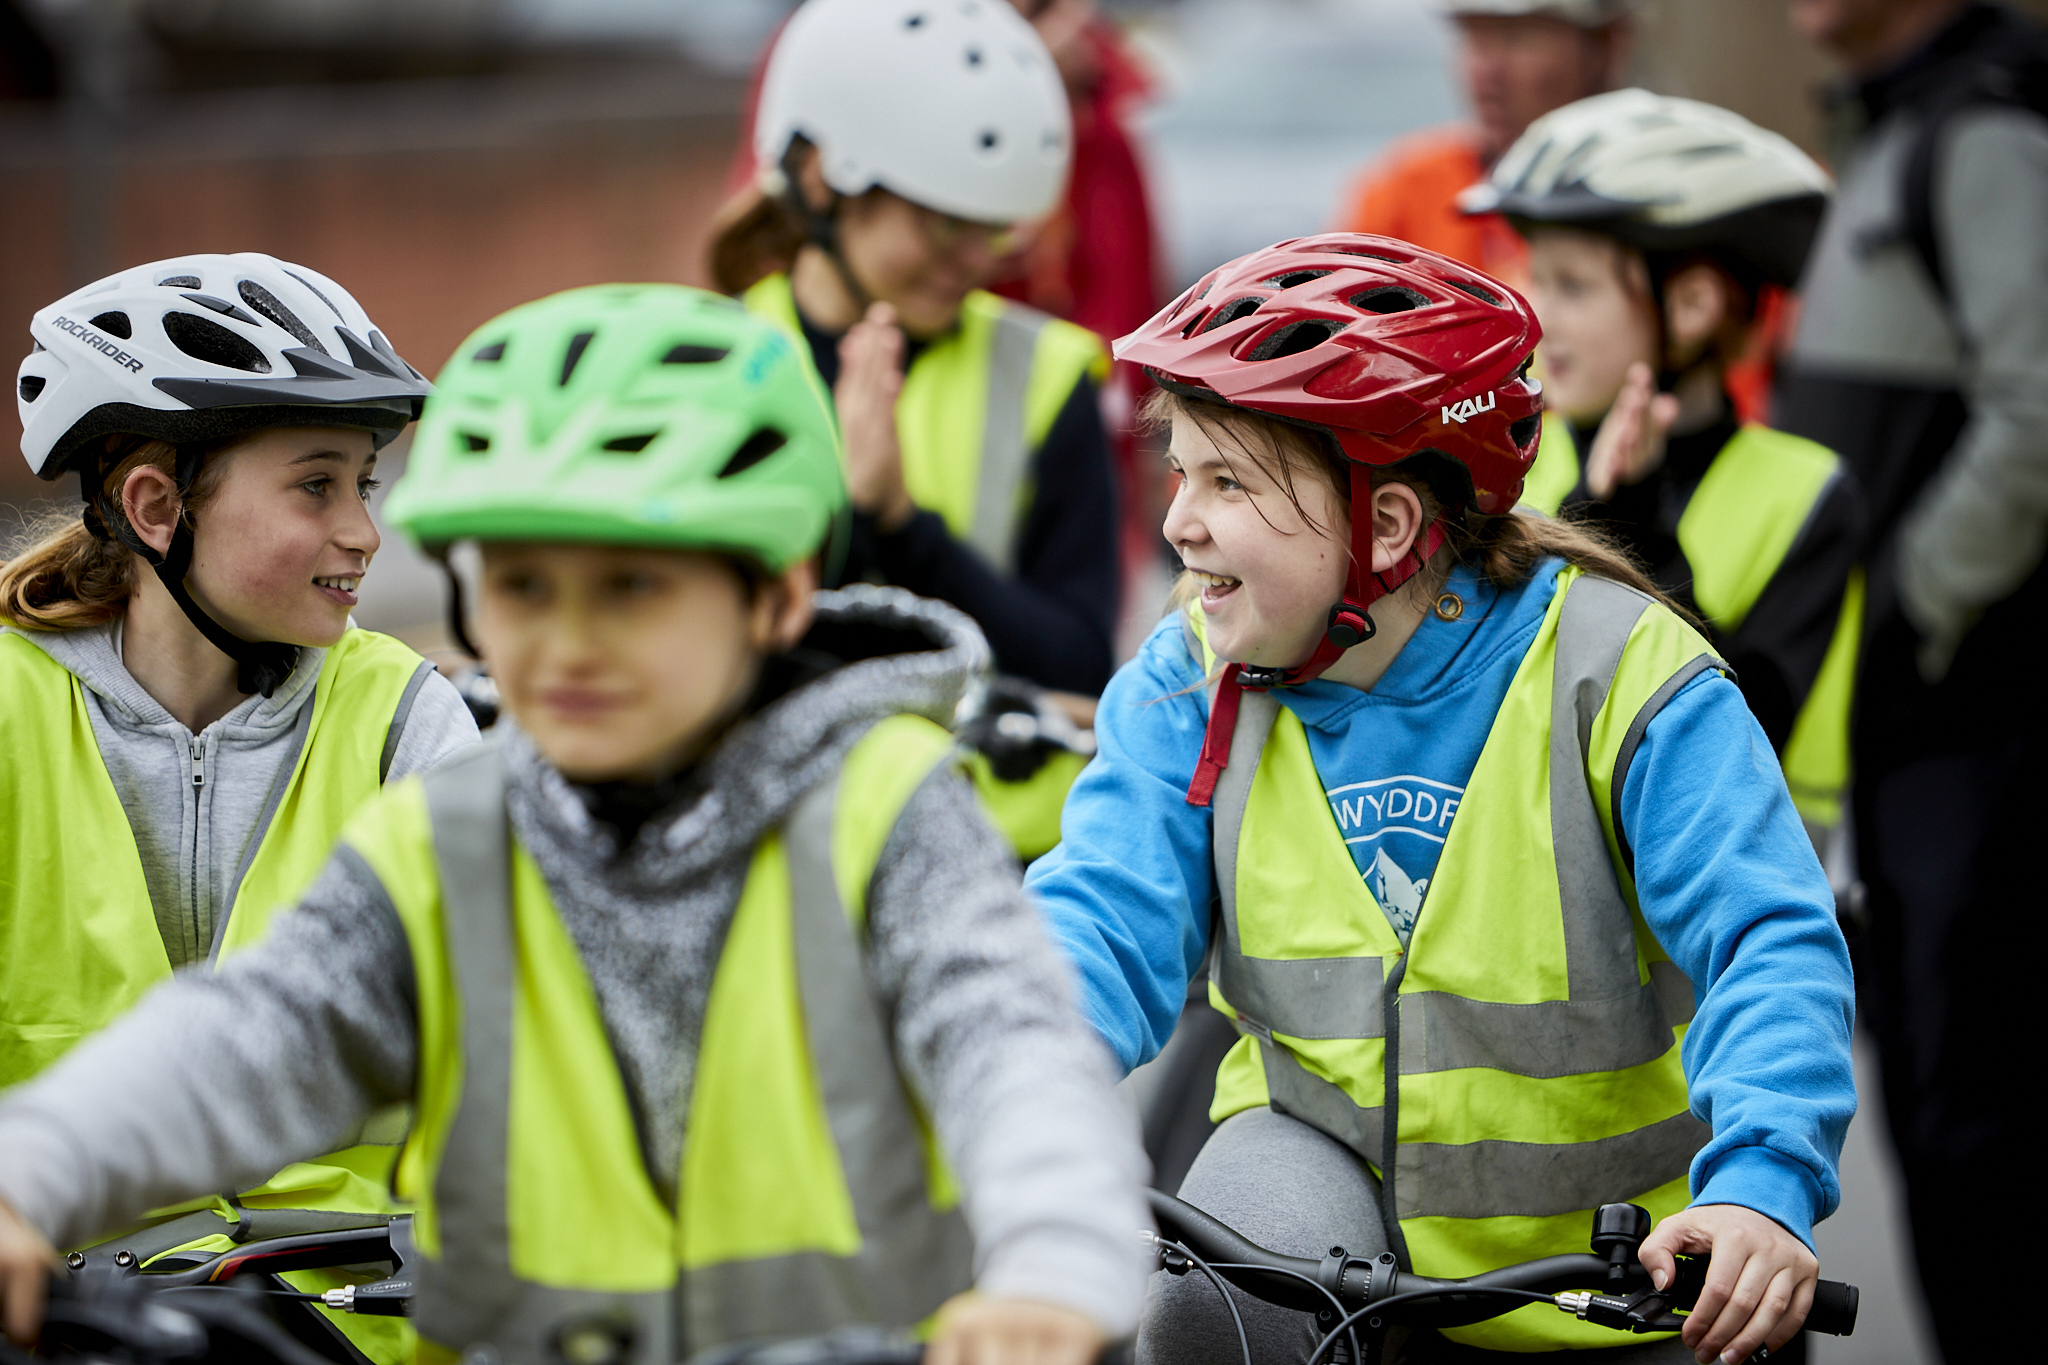 Two girls, wearing helmets and high vis, laugh in a group of cyclists as they take part in Bikeability training